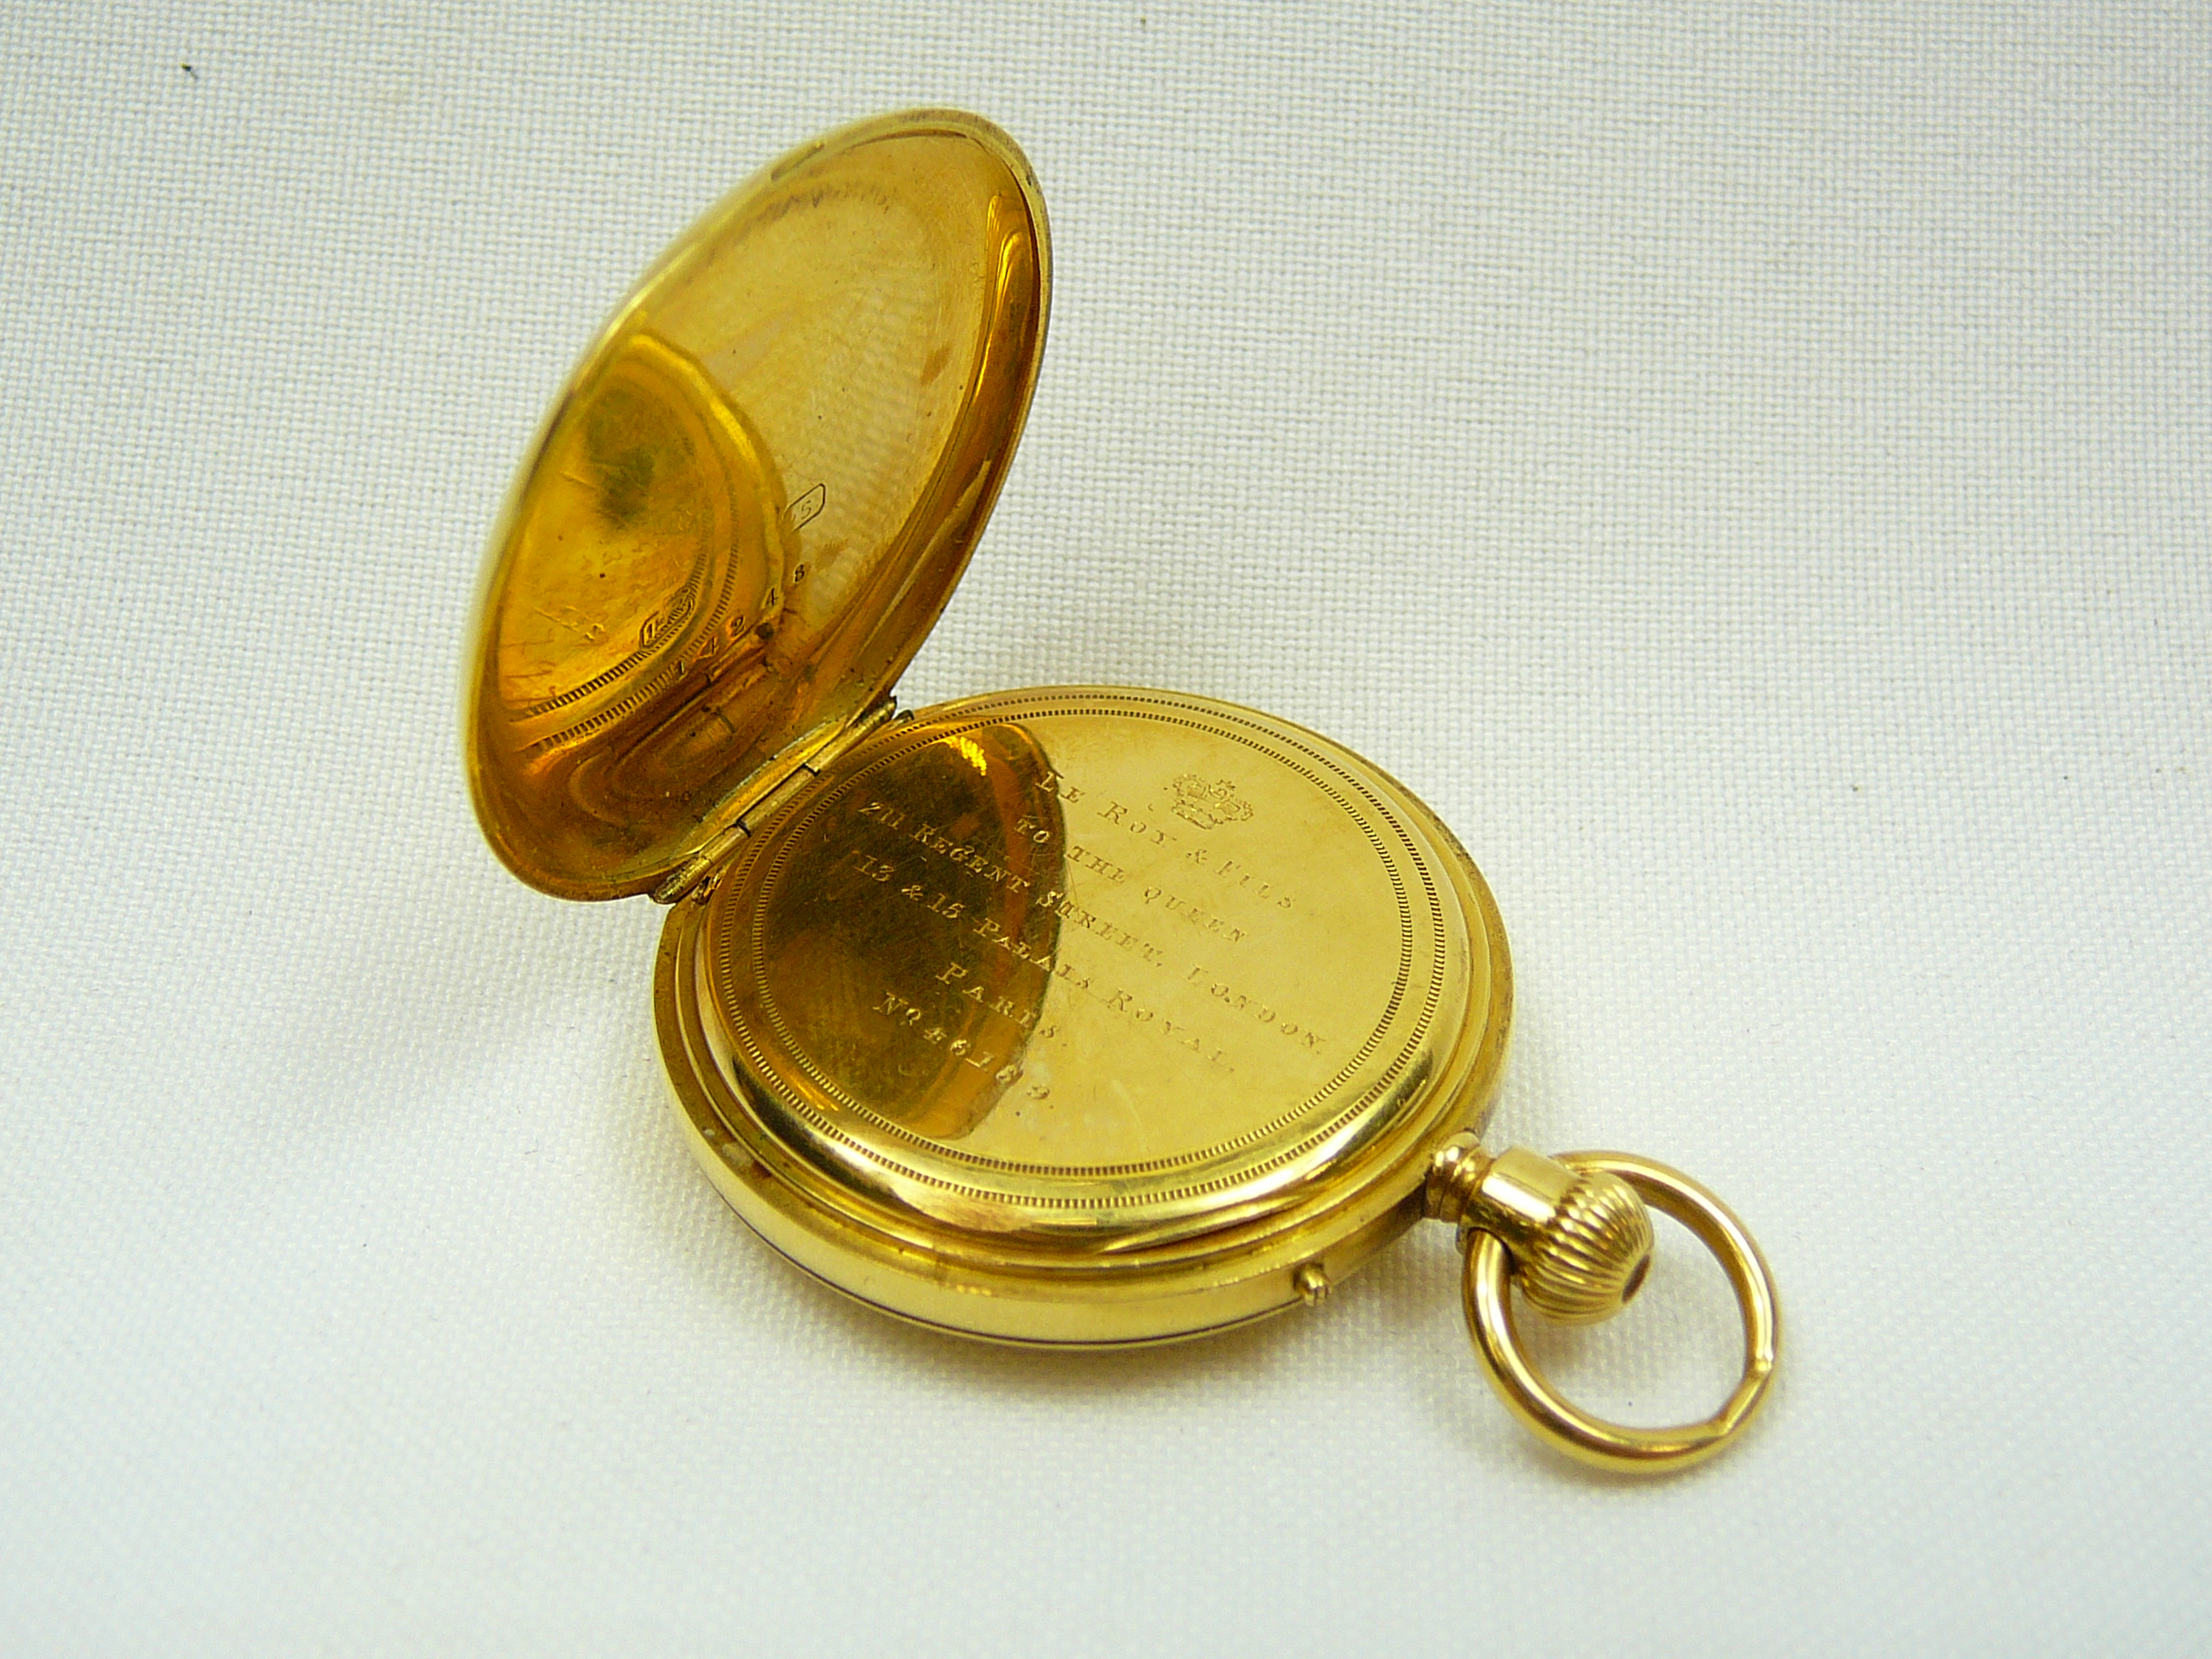 Ladies Antique Gold Fob Watch - Image 4 of 5